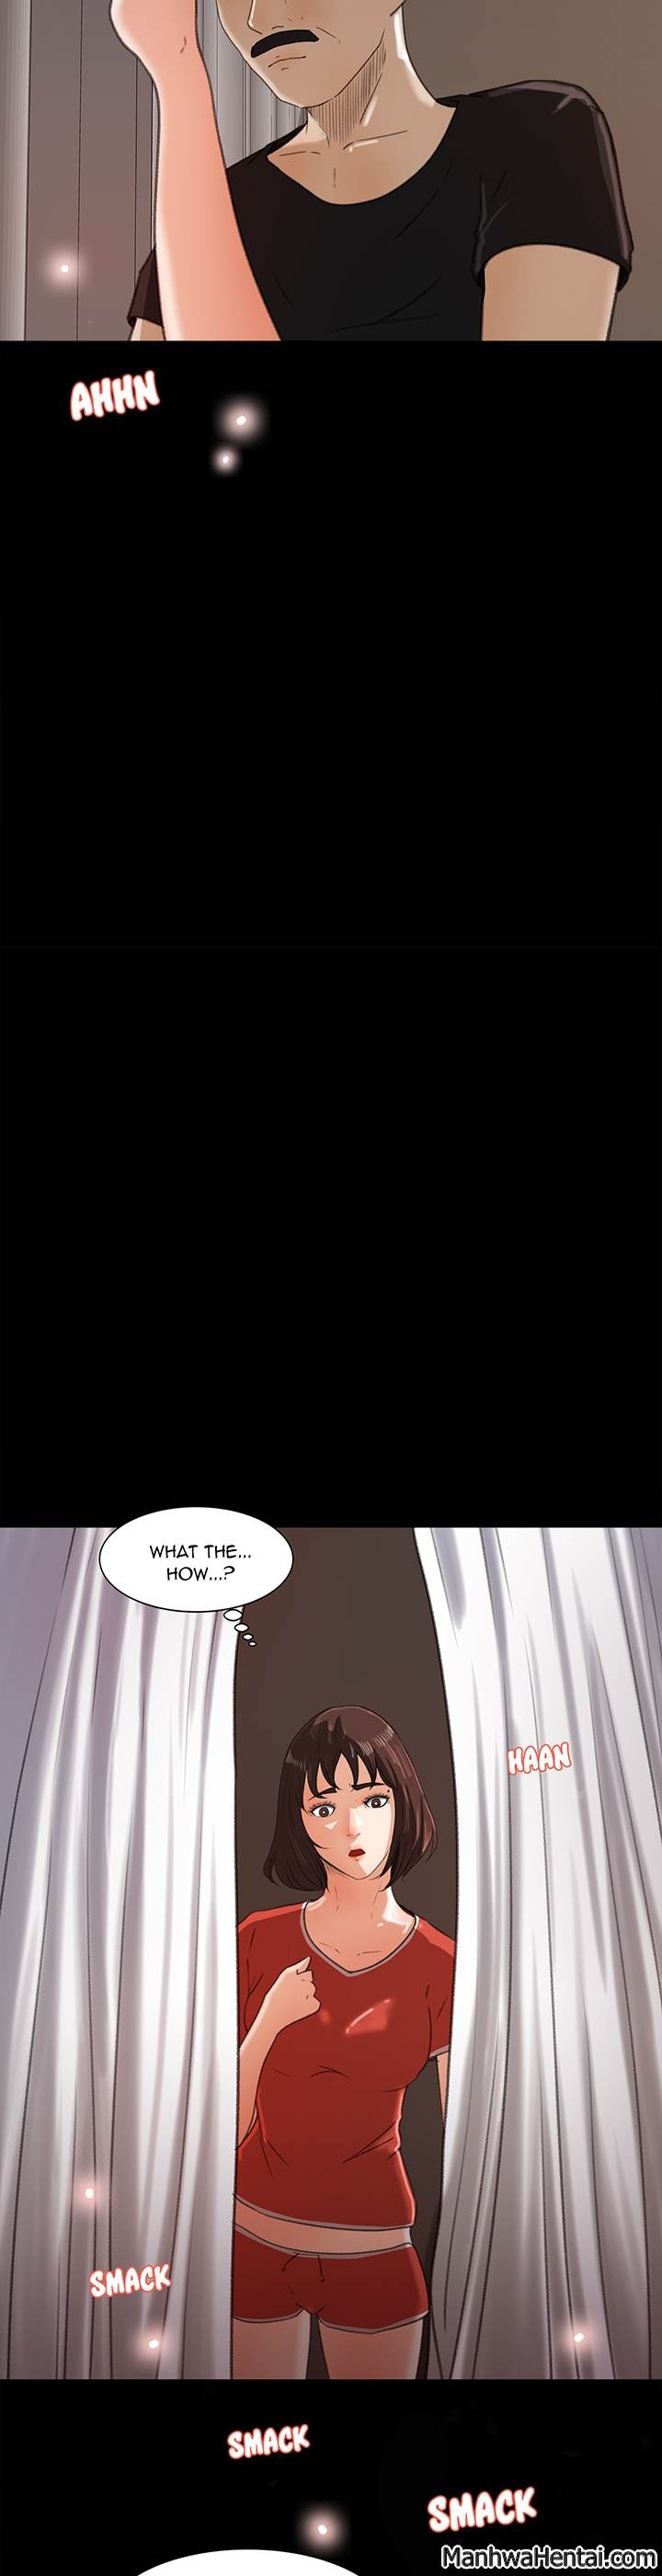 Inside the Uniform - Chapter 13 Page 11